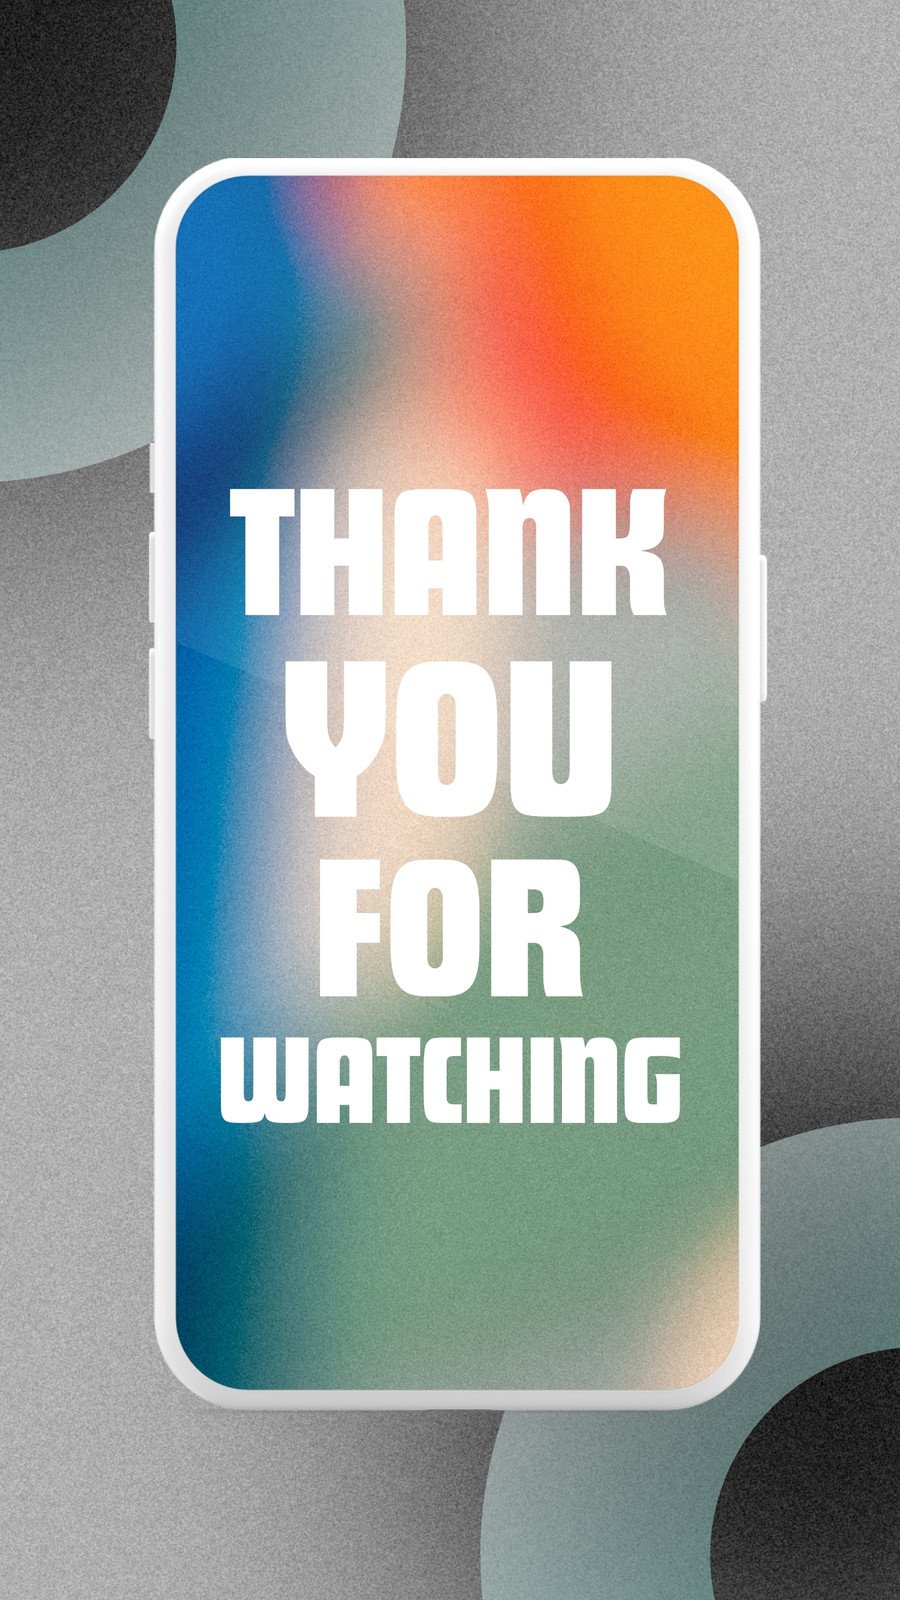 407 Thank You Watching Images, Stock Photos, 3D objects, & Vectors |  Shutterstock